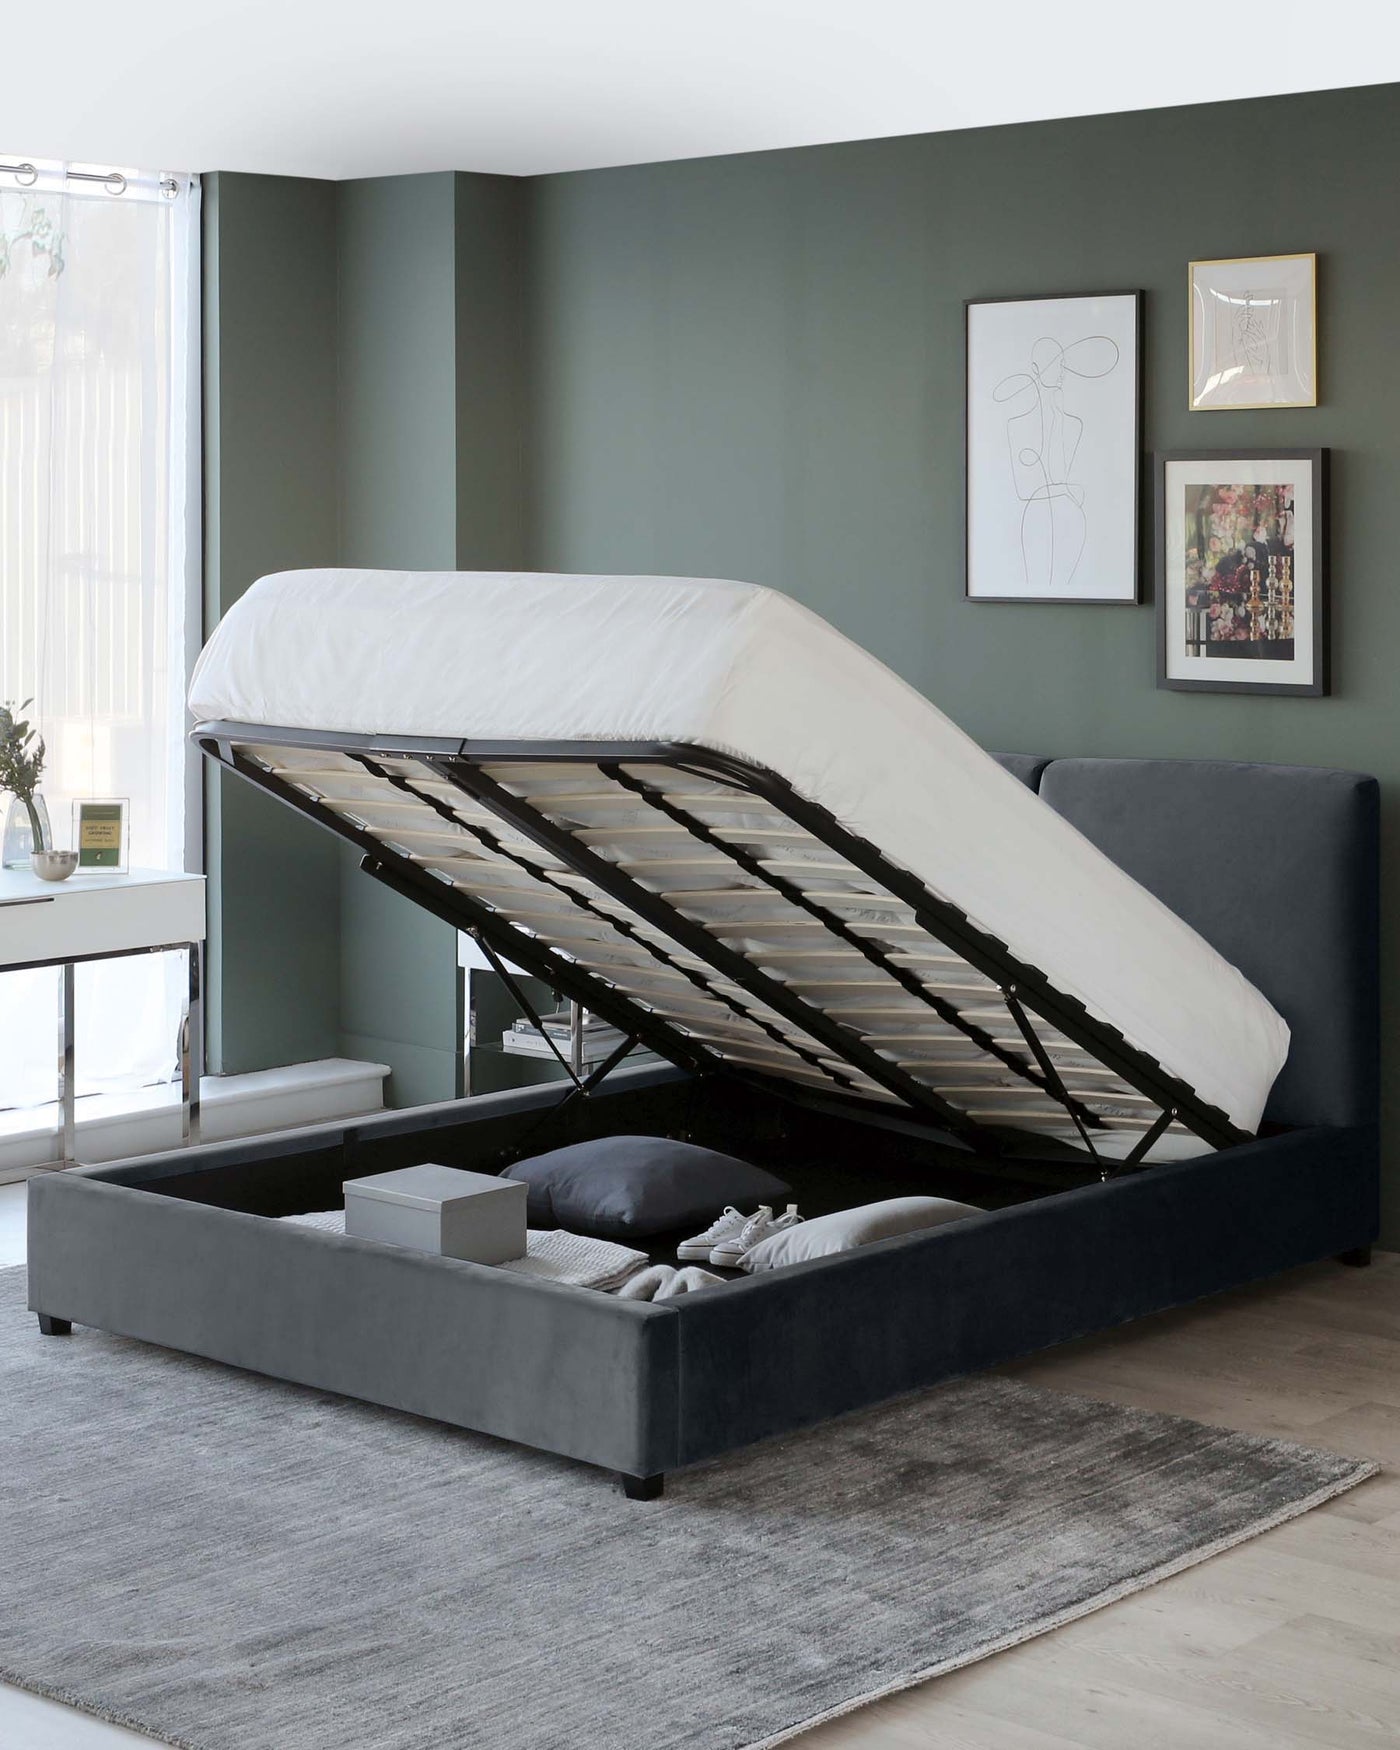 A modern dark grey upholstered storage bed with a lifted mattress base revealing a spacious under-bed storage compartment. The bed features a simple, sleek design and is positioned on a light grey area rug that complements the neutral-toned flooring.